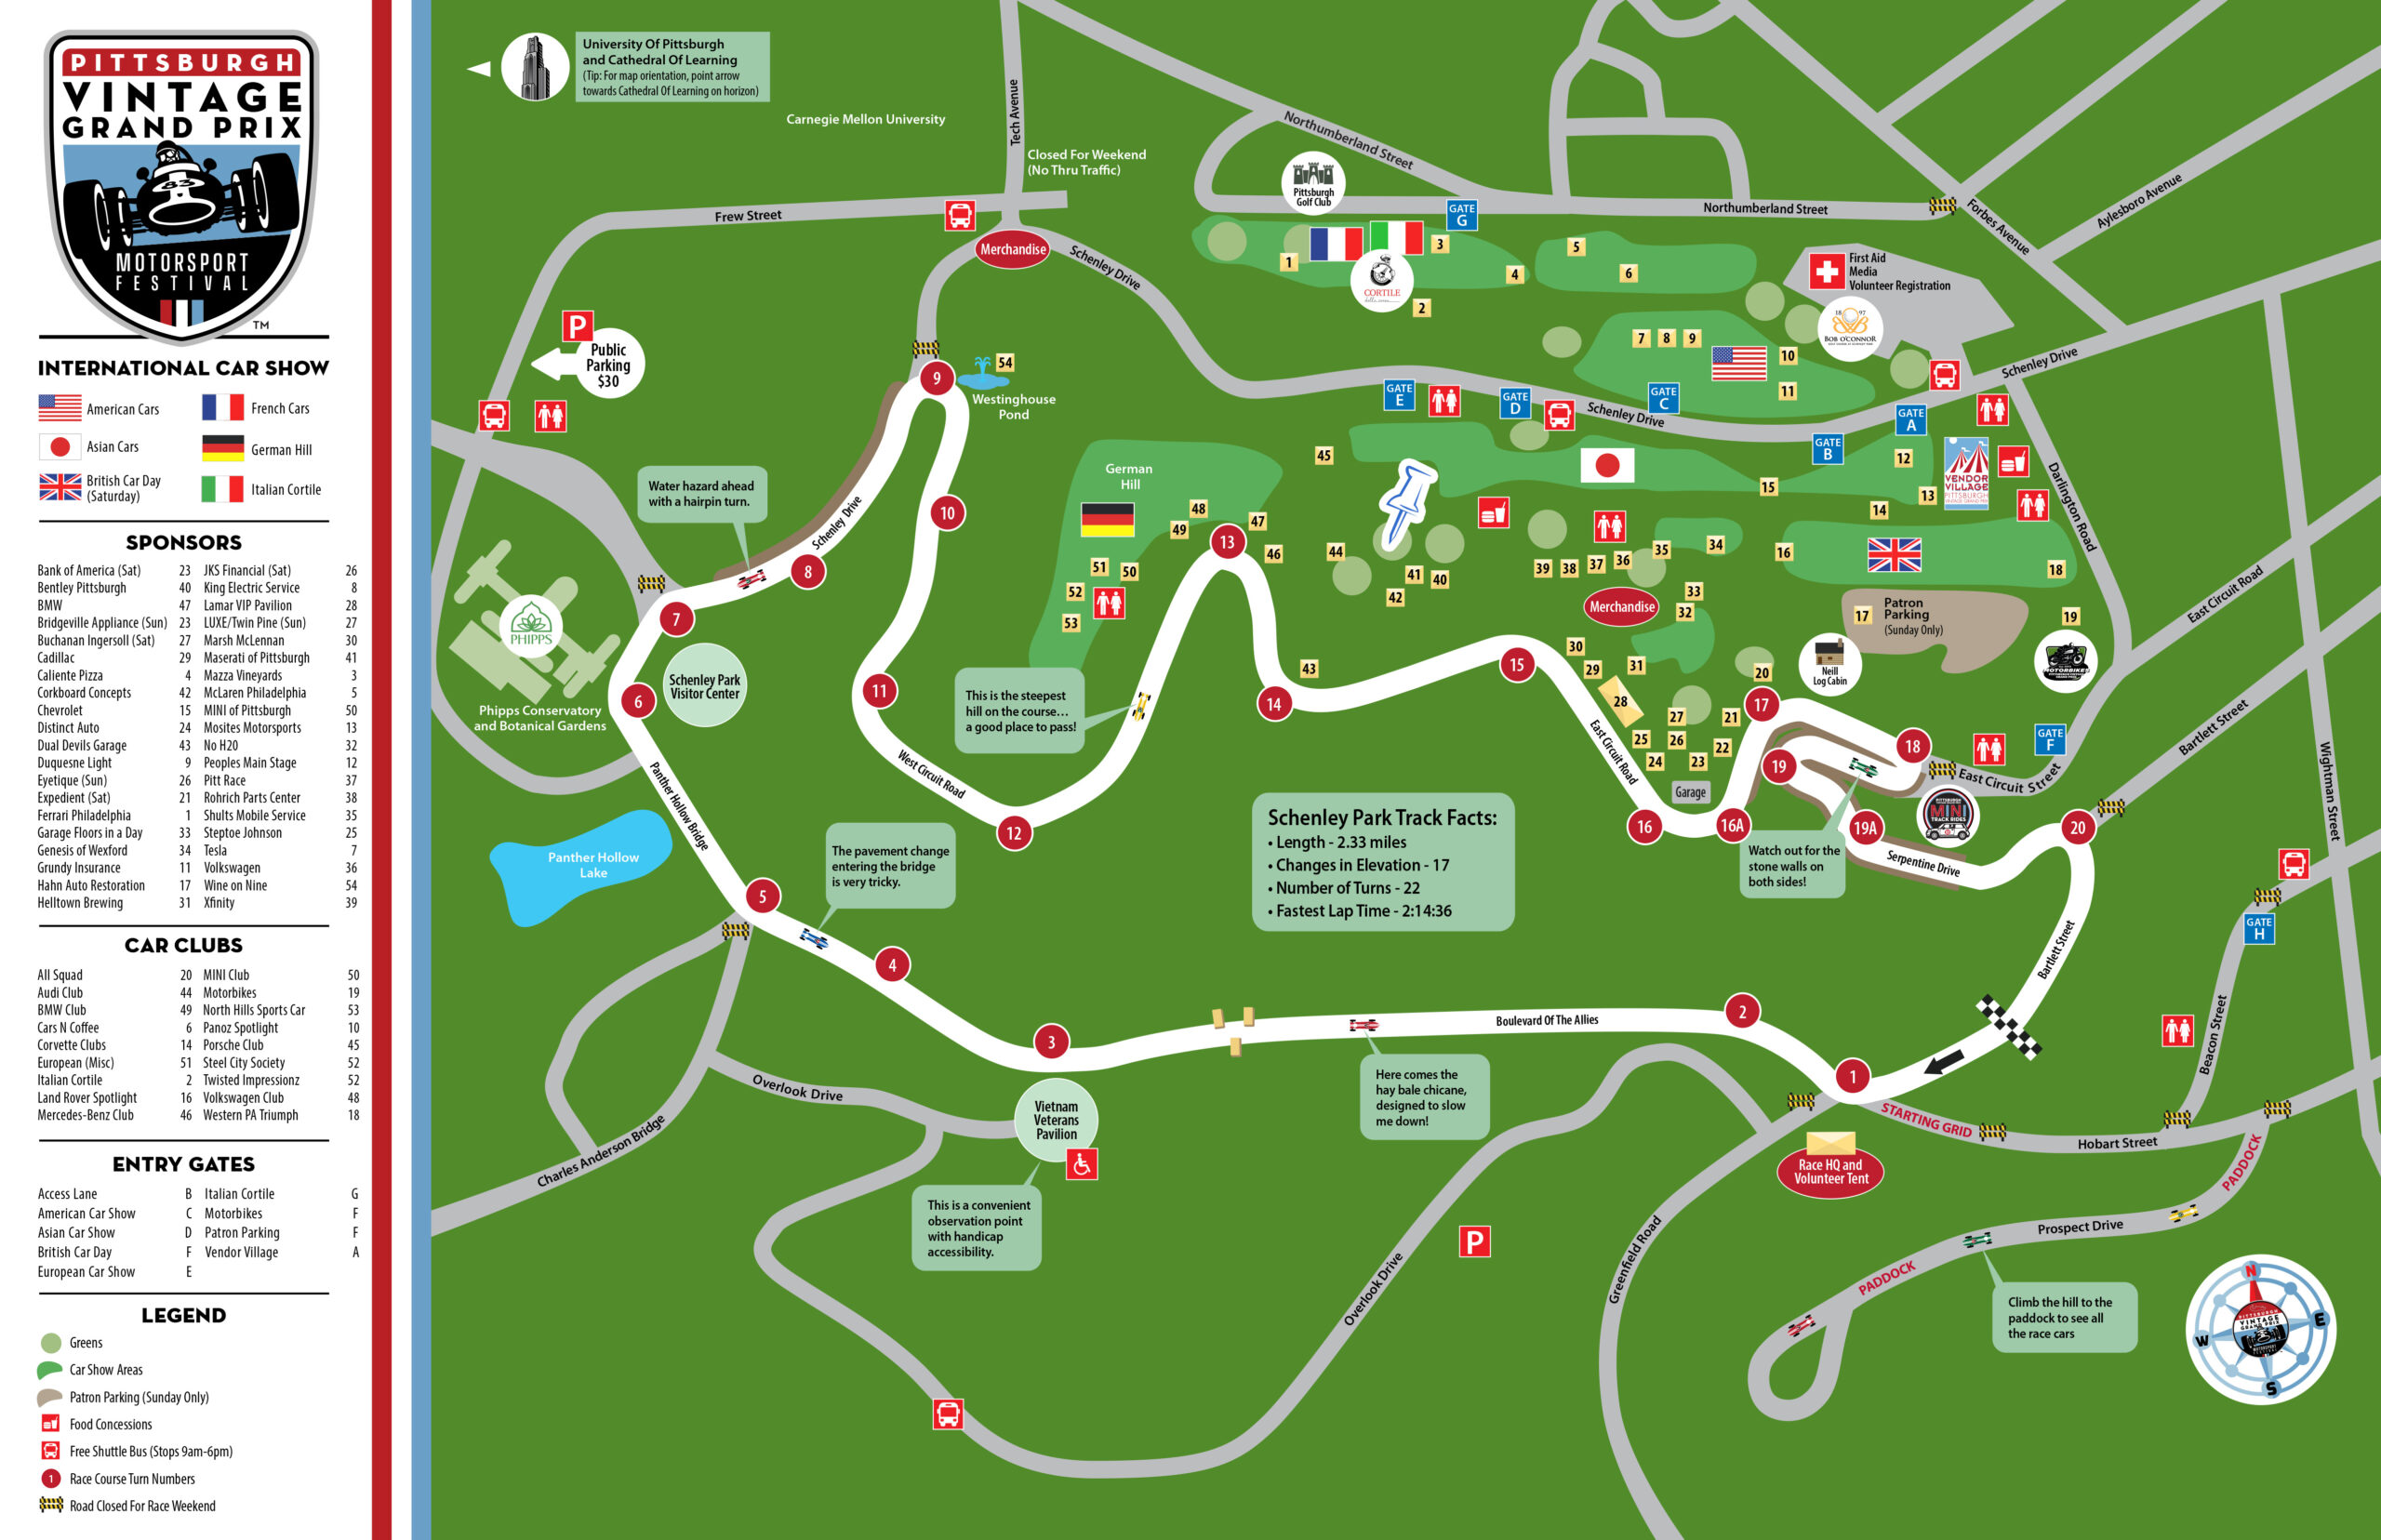 Map of Pittsburgh Vintage Grand Prix